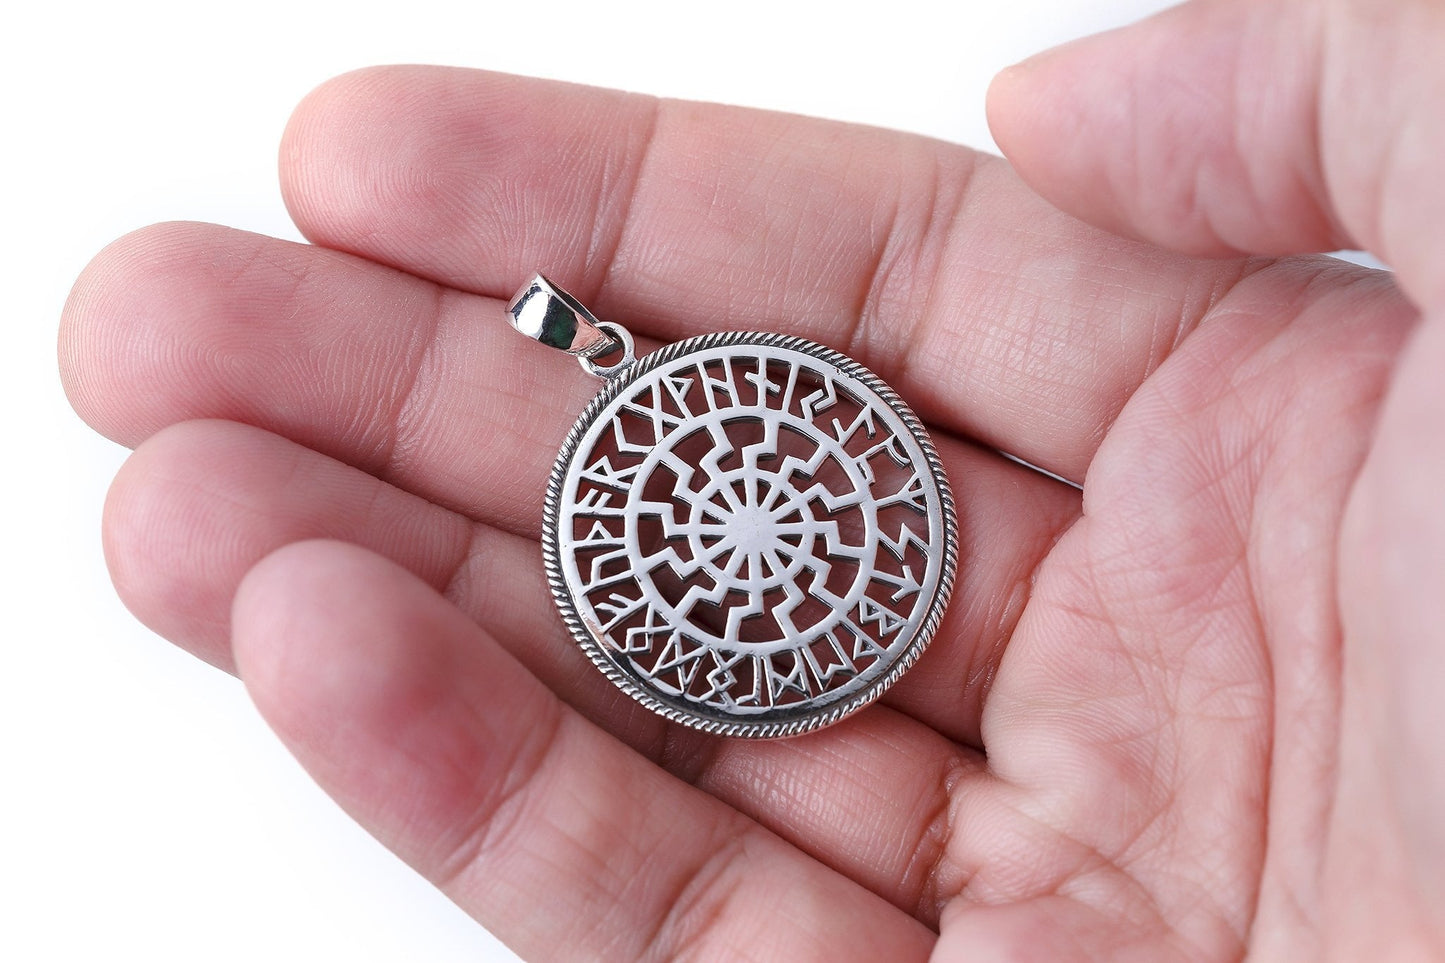 Sterling Silver Sonnenrad Pendant with Runes - SilverMania925